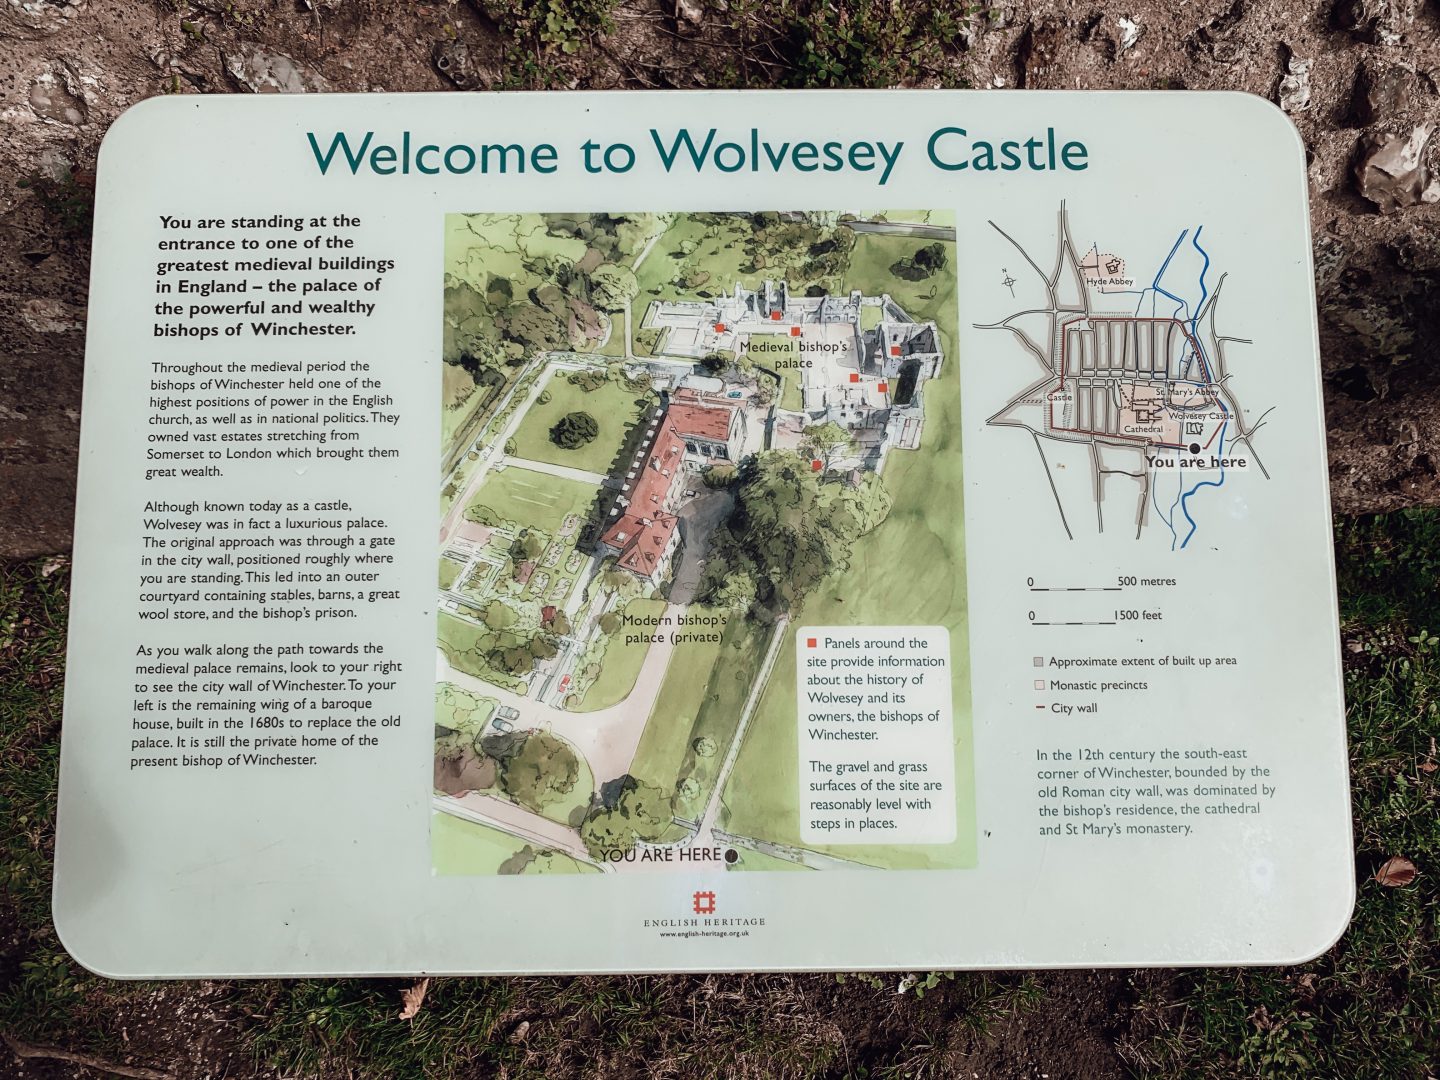 WOLVESEY CASTLE REMAINS